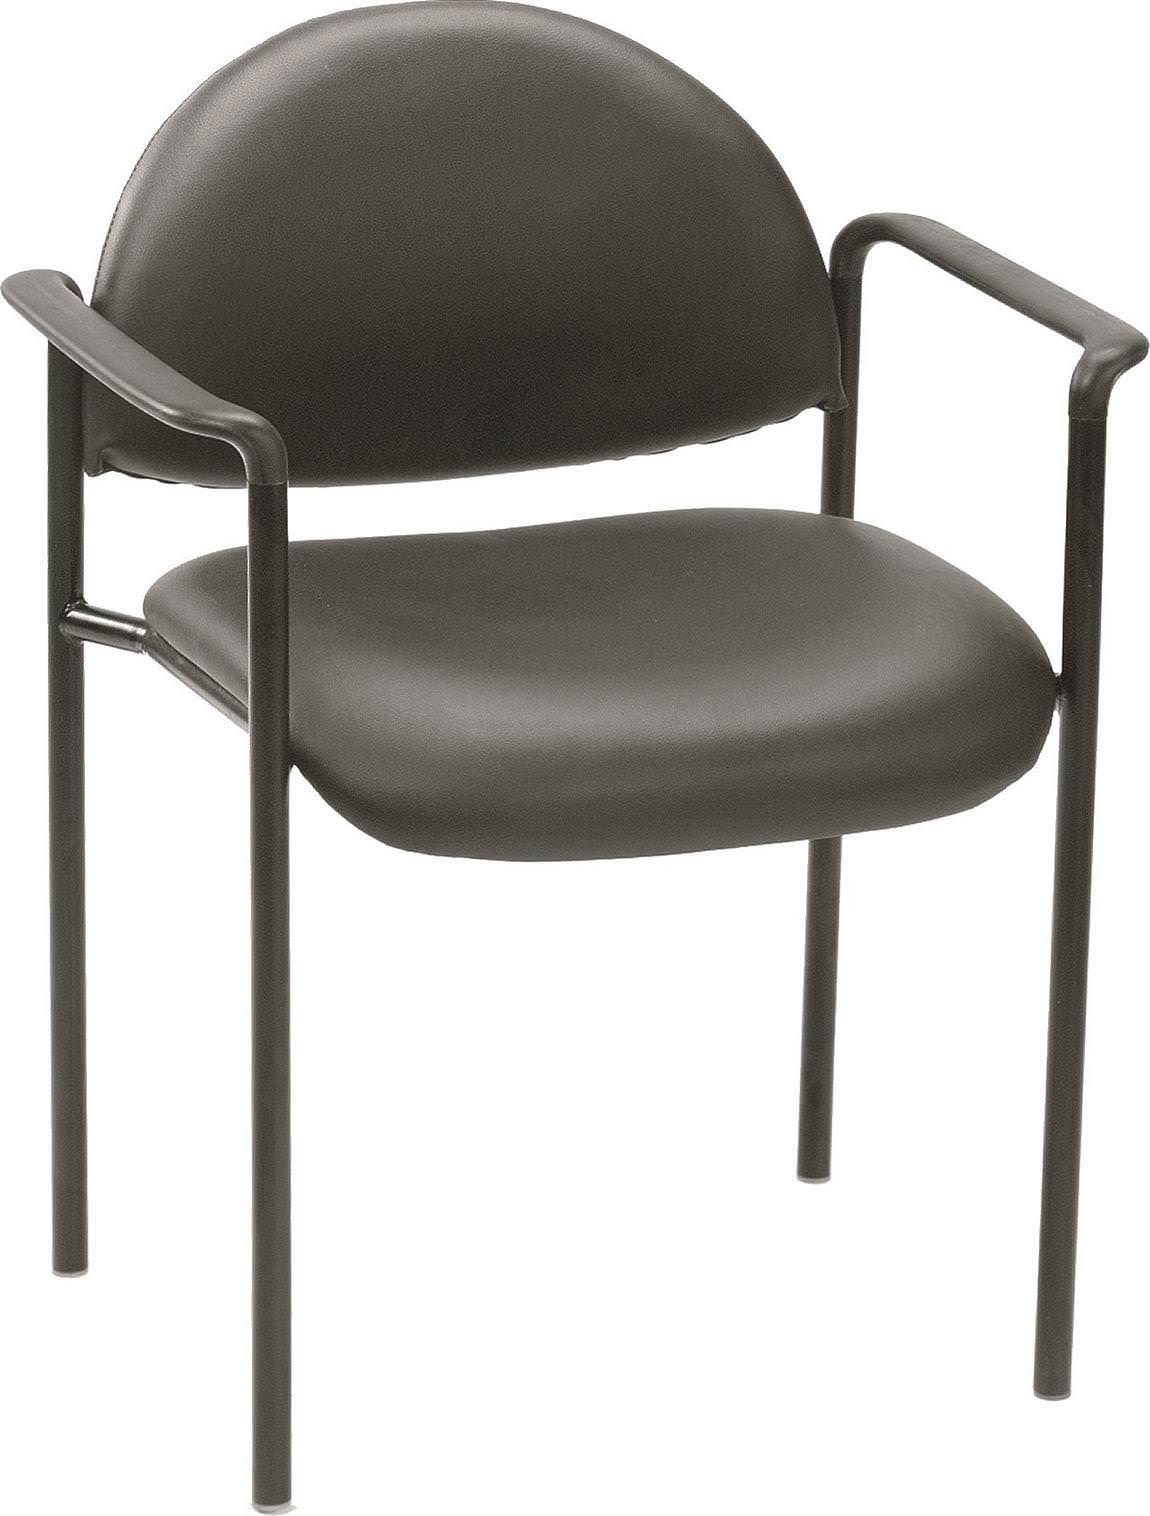 Black Vinyl Stacking Guest Chair